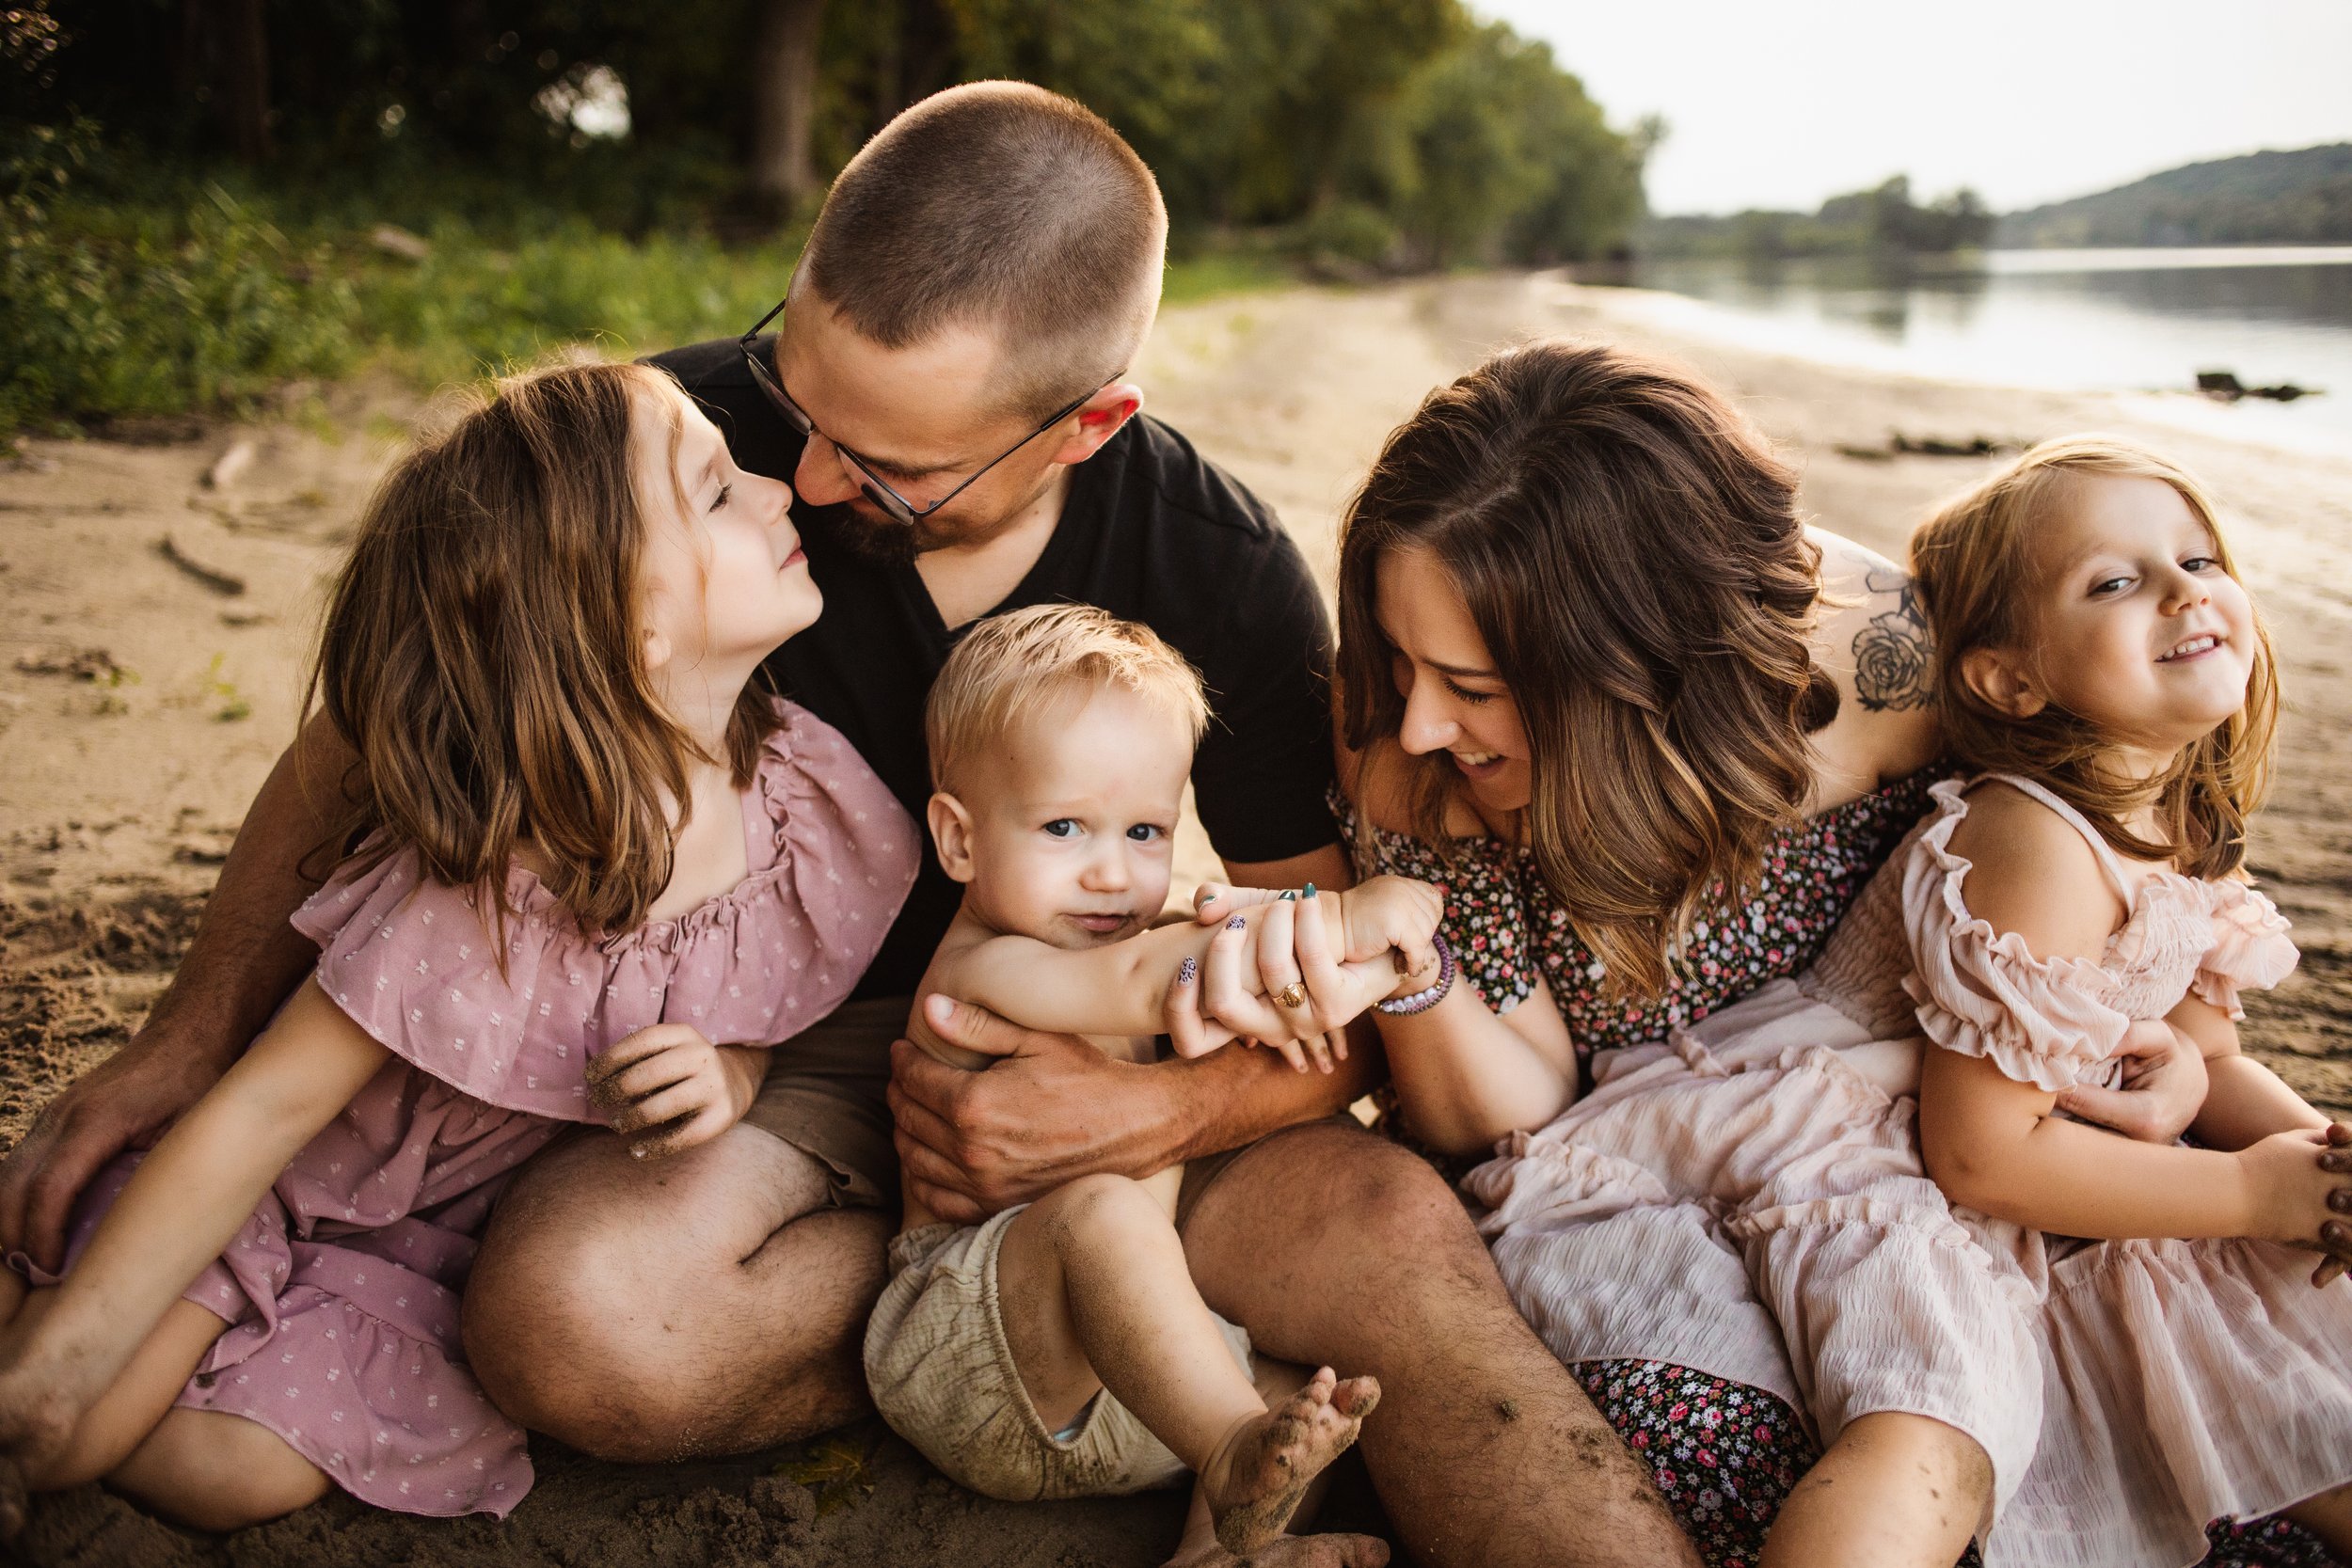  A family of five sits on the sand beach of the Illinois River and smiles at one another by Teala Ward Photography. three kids summer #TealaWardPhotography #TealaWardFamilies #IllinoisRiverPhotography #IllinoisFamilyPhotography #familylifestylepics 